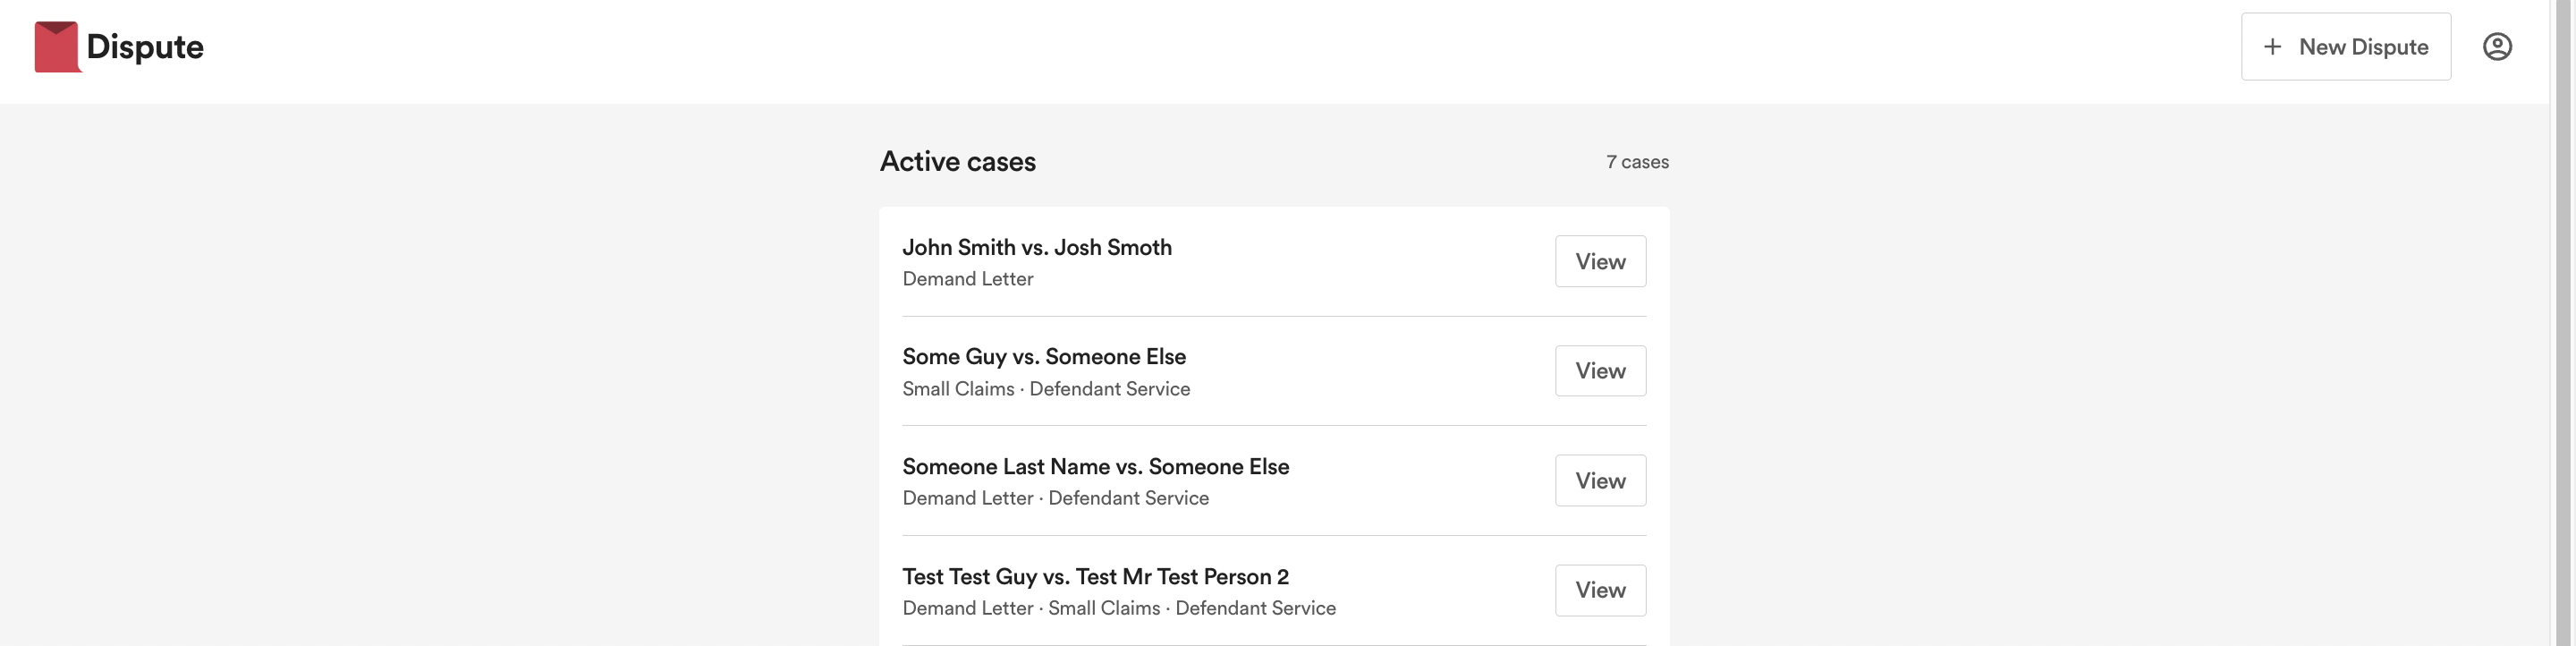 small claims case list